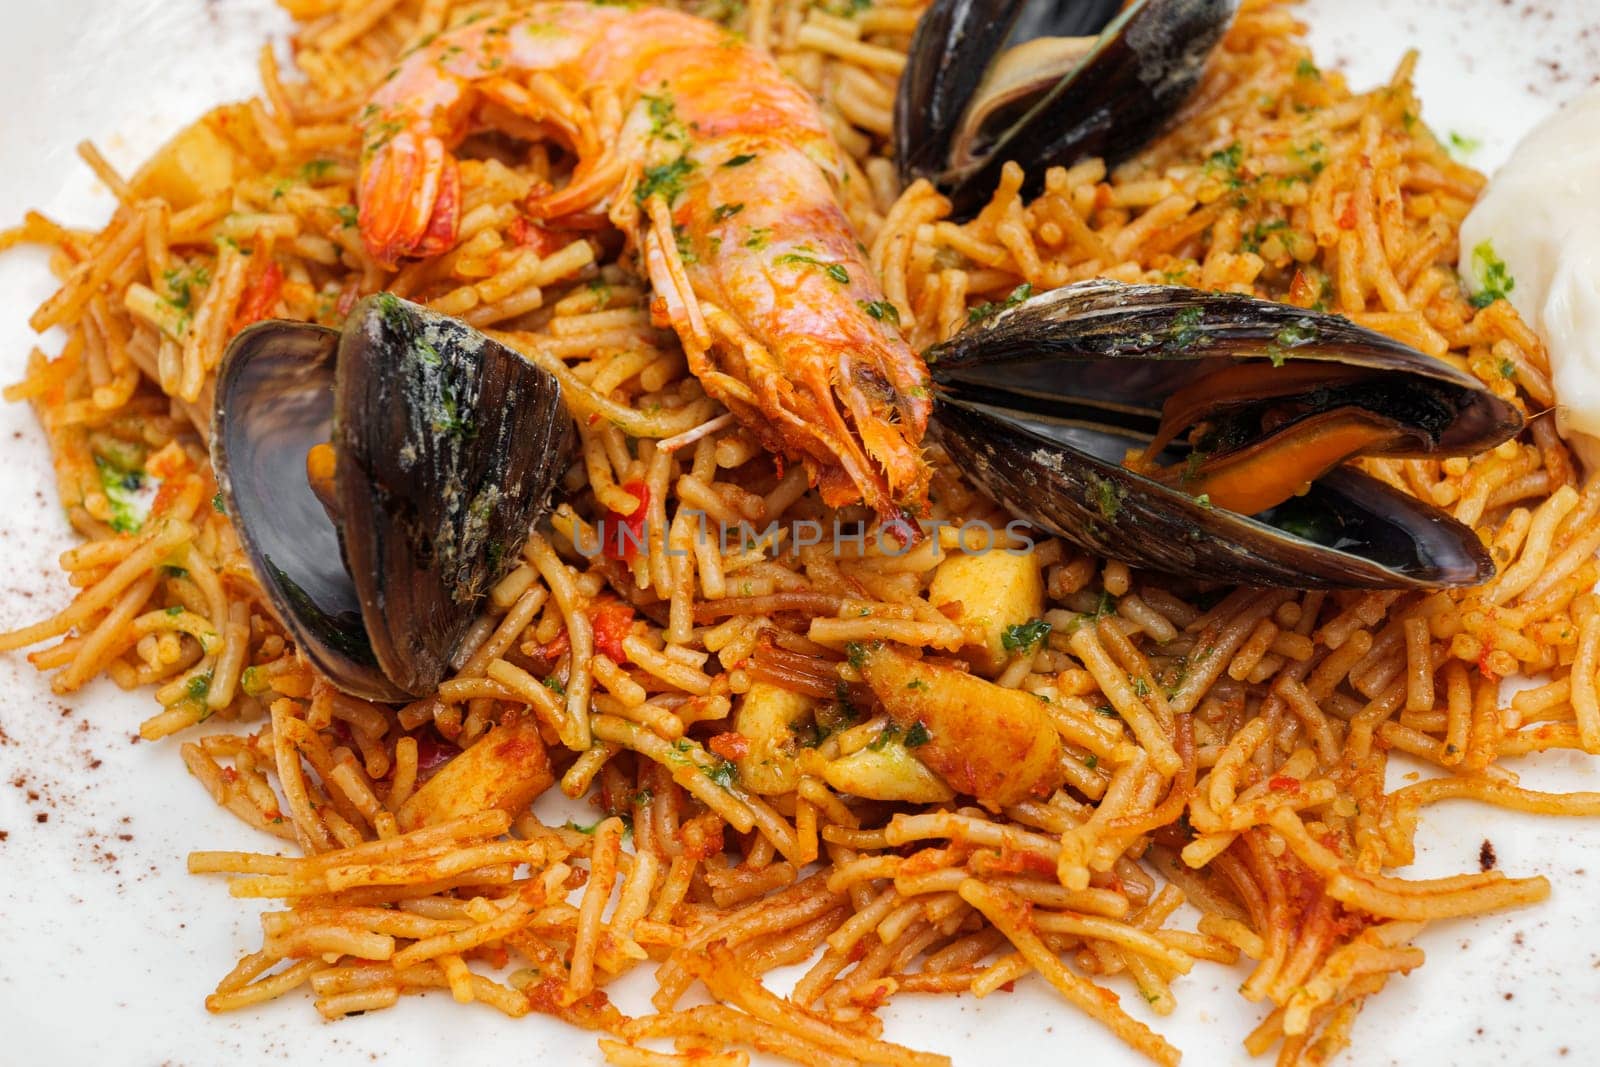 Noodles with tomato sauce and seafood, mussels and shrimps on white plate